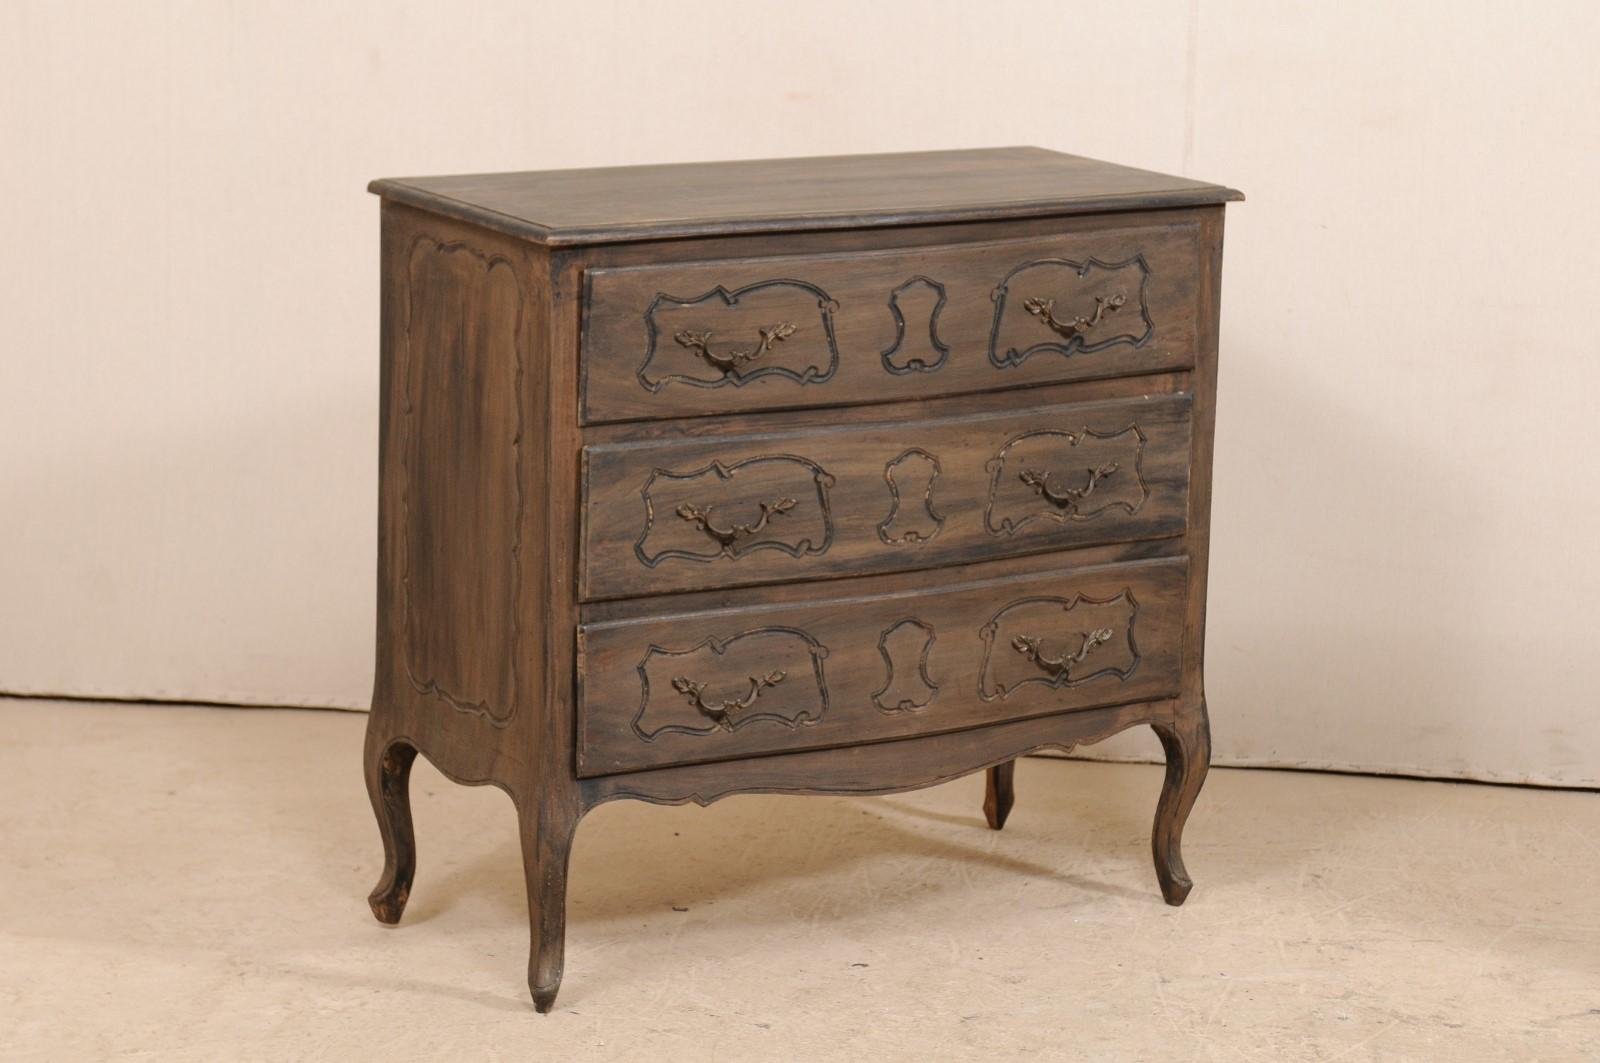 American Pair of Mid-20th Century Painted and Carved Wood Chests on Cabriole Legs